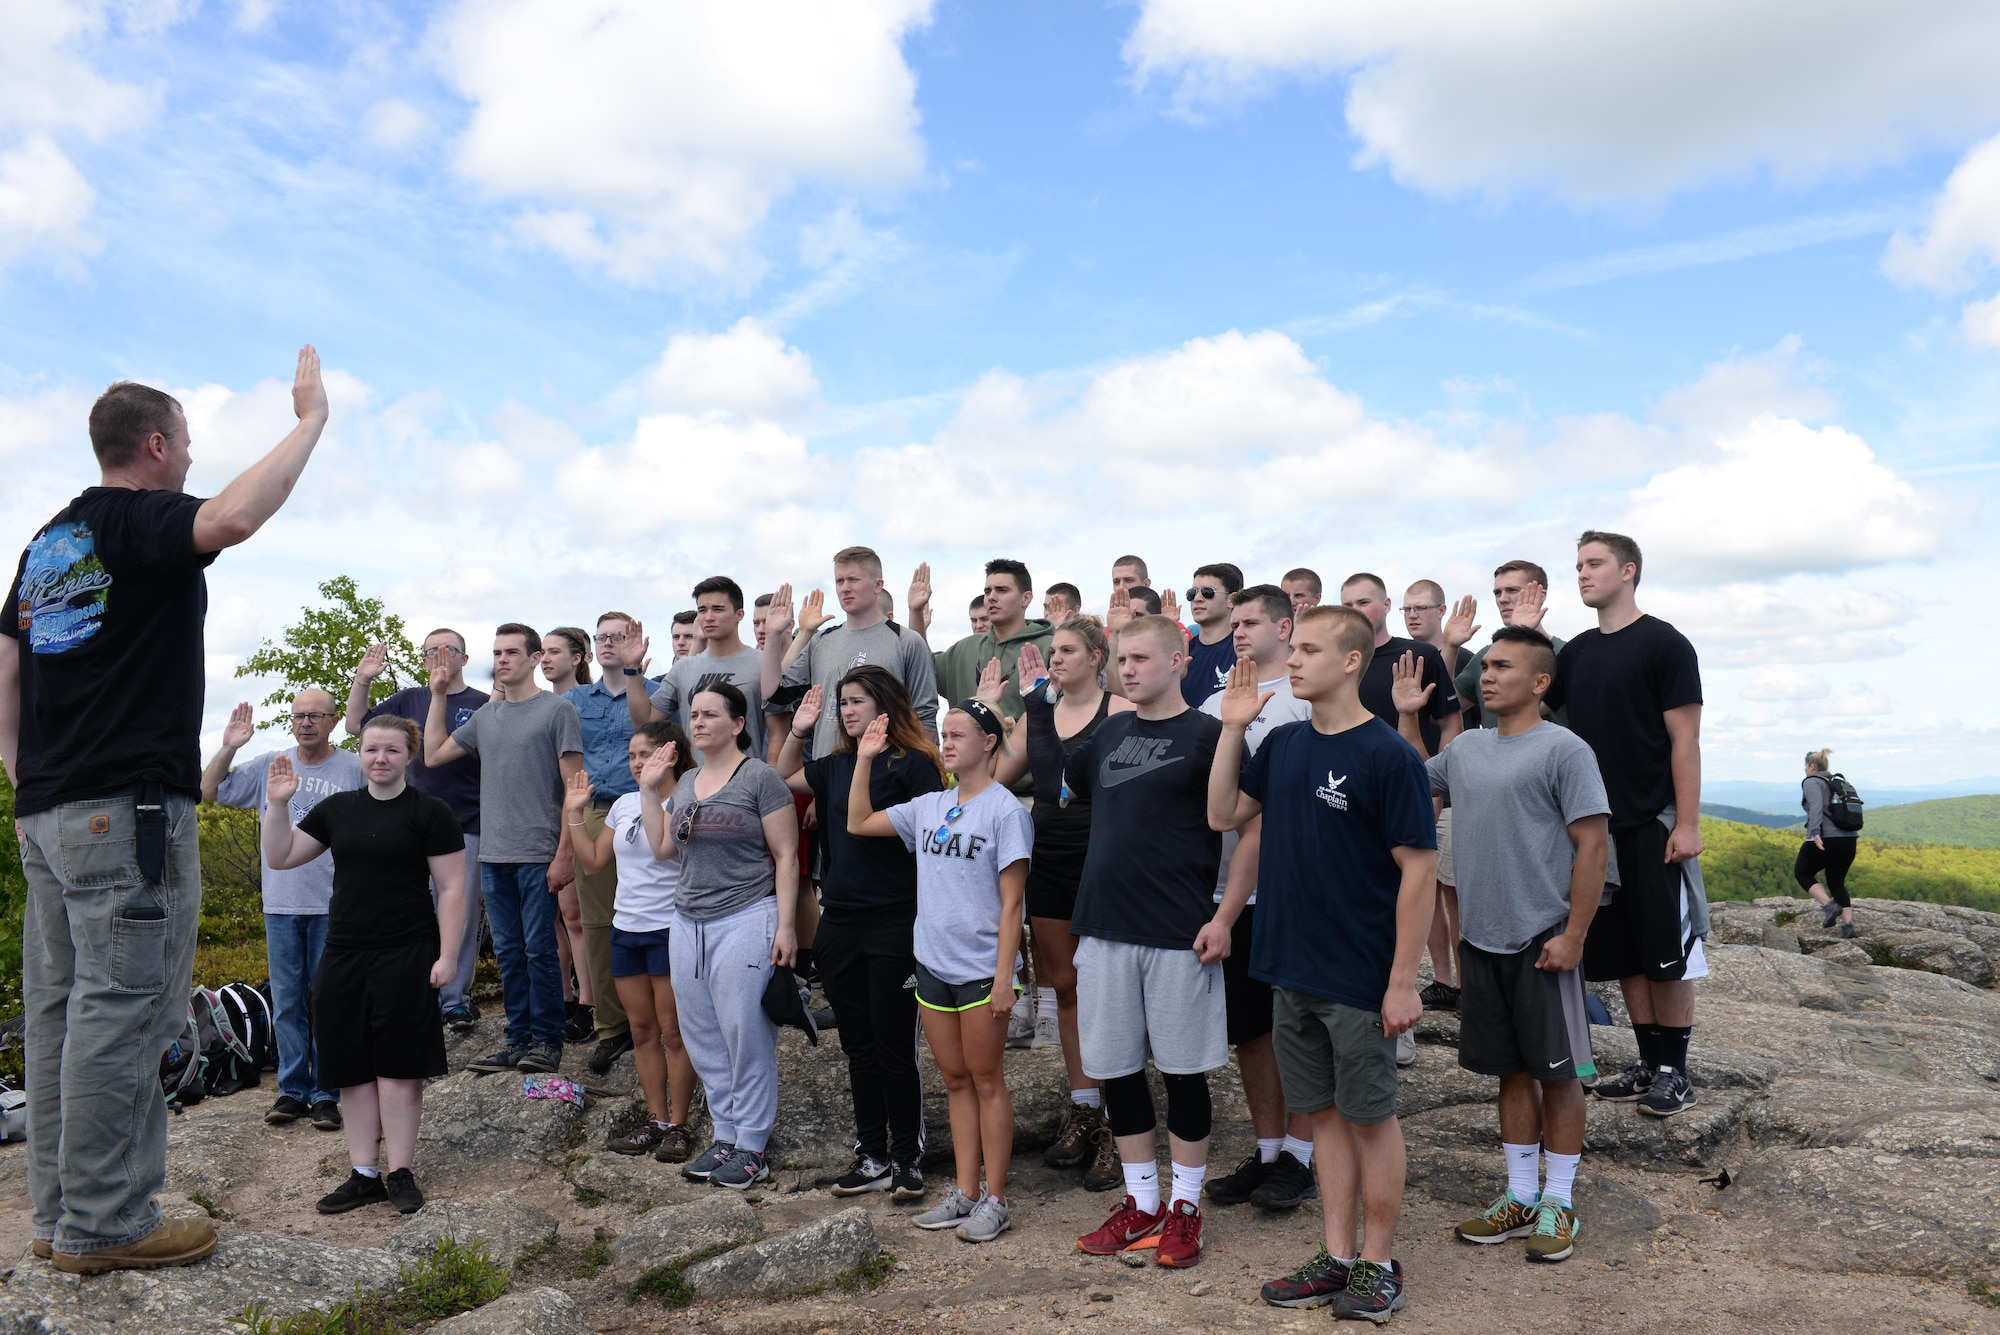 Members of the 157th Air Refueling Wing Student Flight and the 157th ARW recruiting team, are reenlisted ontop of Mount Major in Alton, N.H. June 4, 2017. Captain Joseph A. Smith III reenlisted members ontop of the mountain to mark the beginning of a newly improved student flight program. (United States Air National Guard Photo By Victoria Nelson)